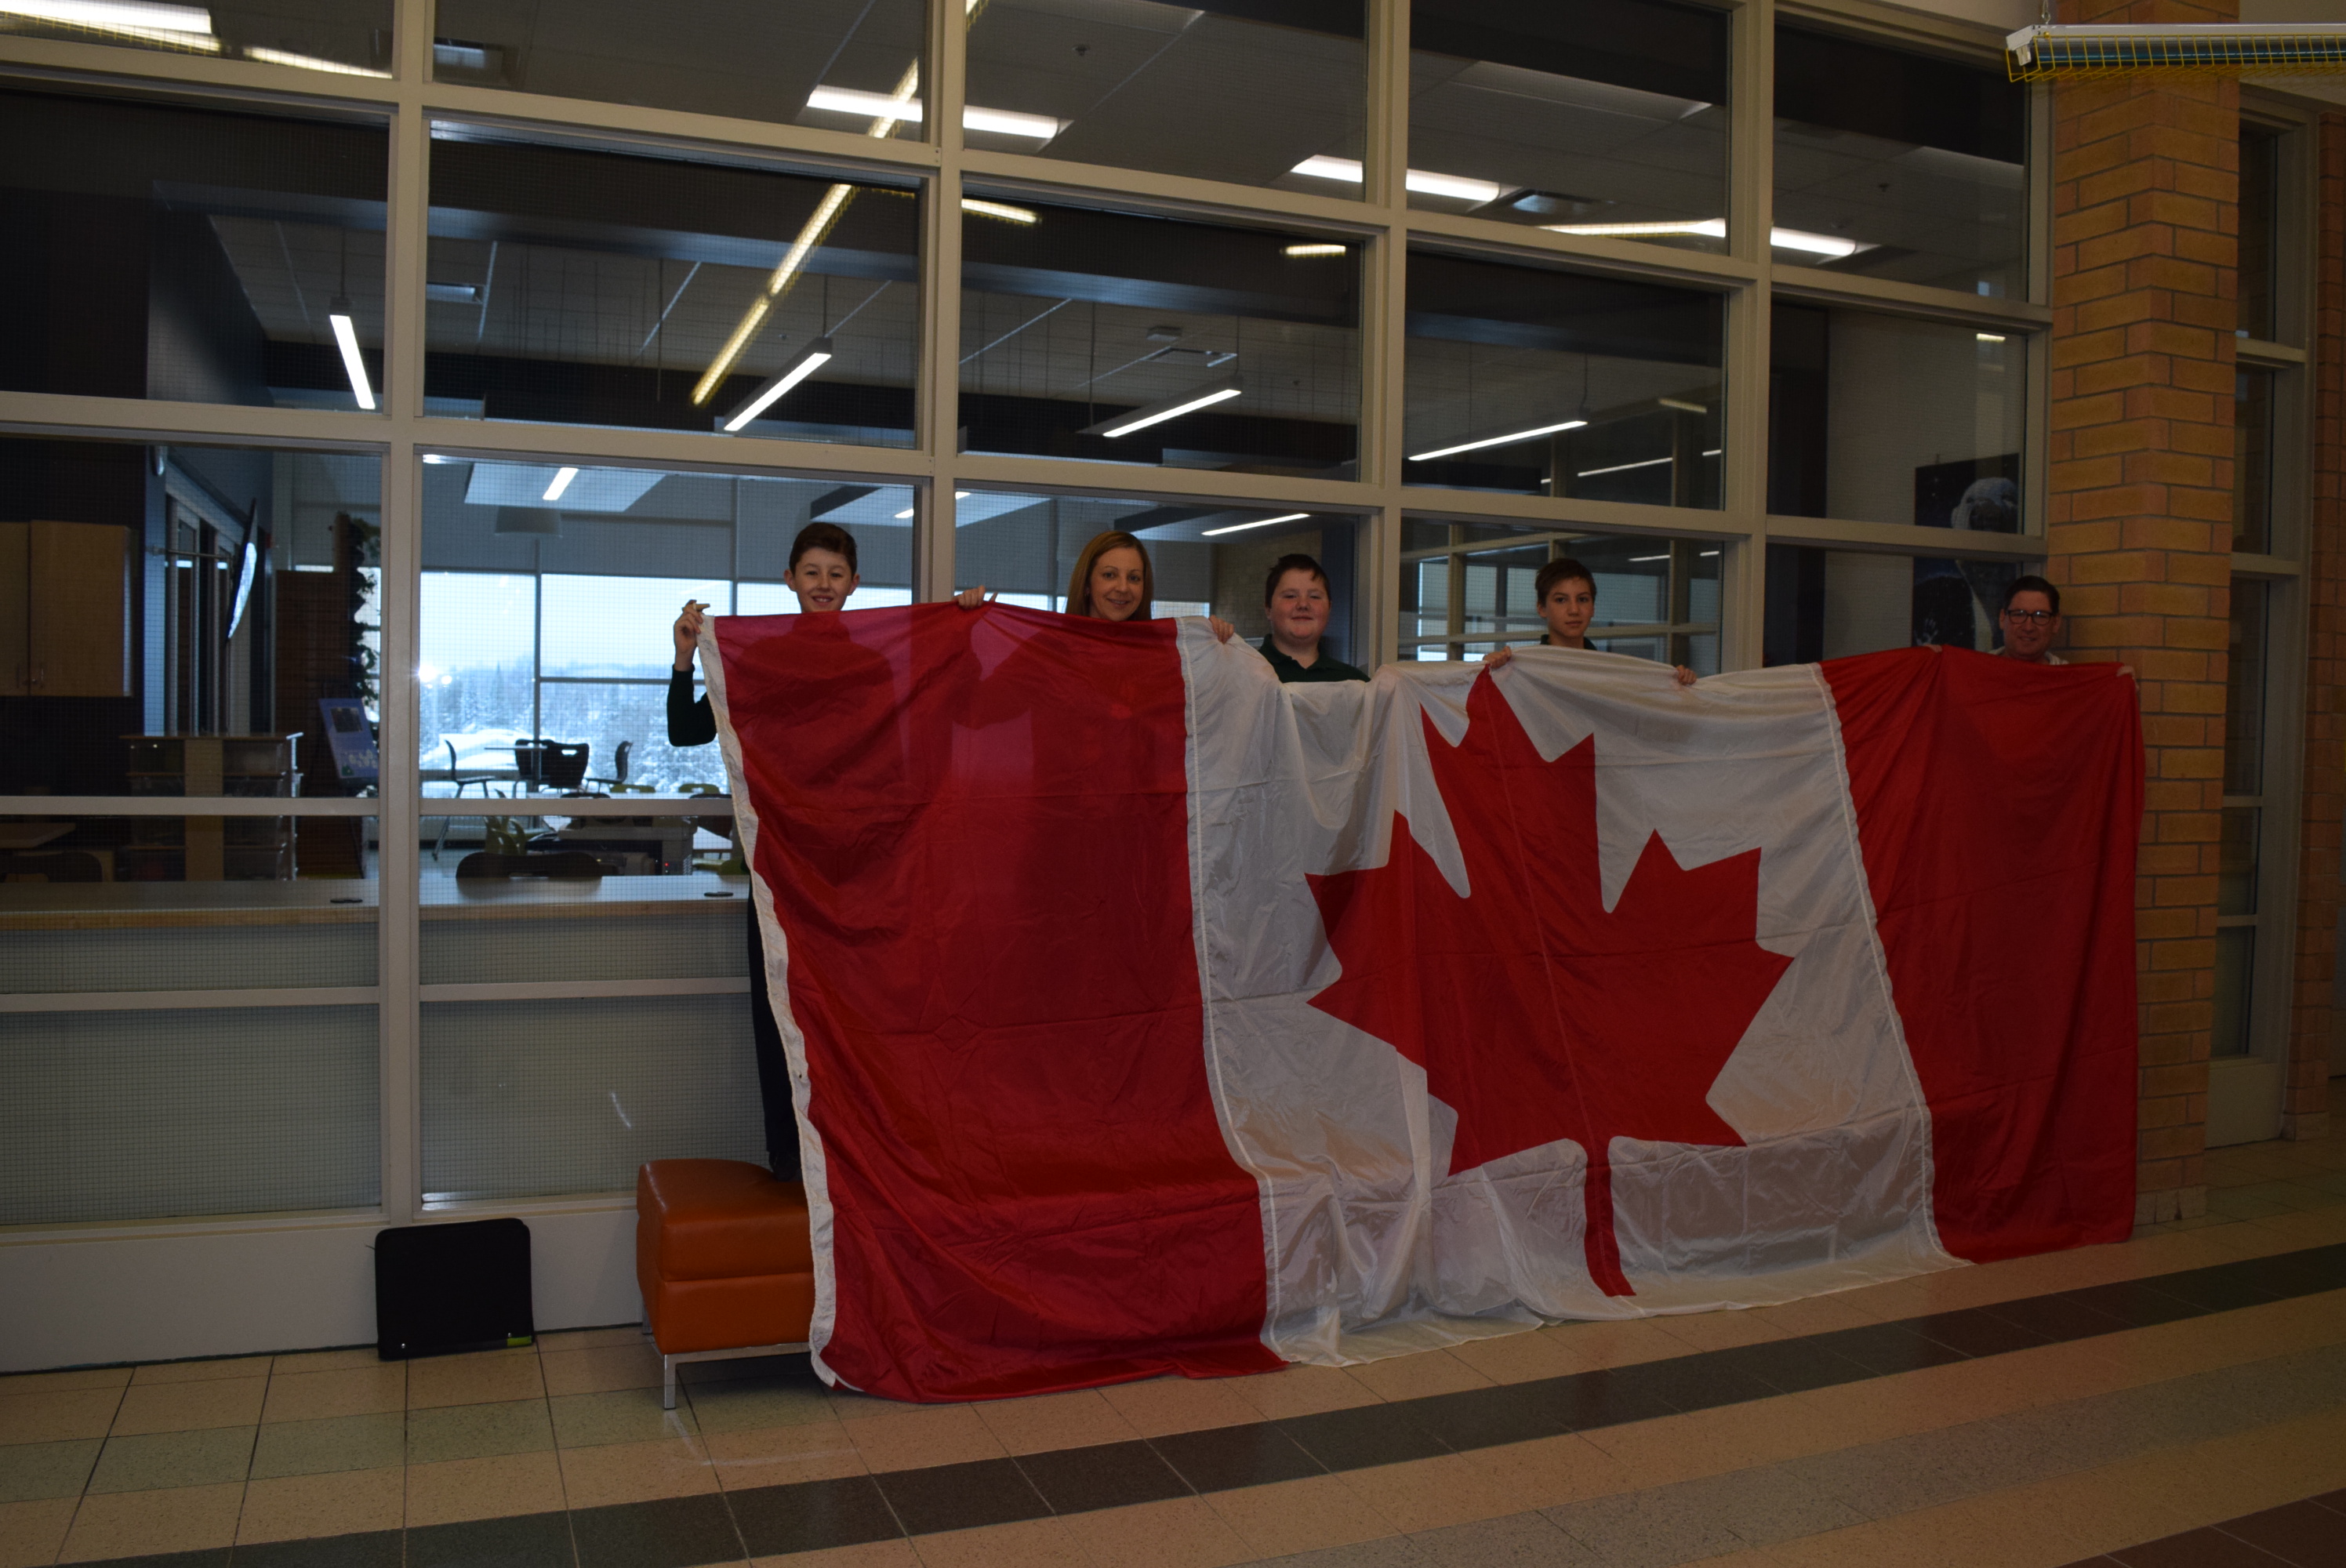 St. Benedict students hold up the Canadian flag with pride.